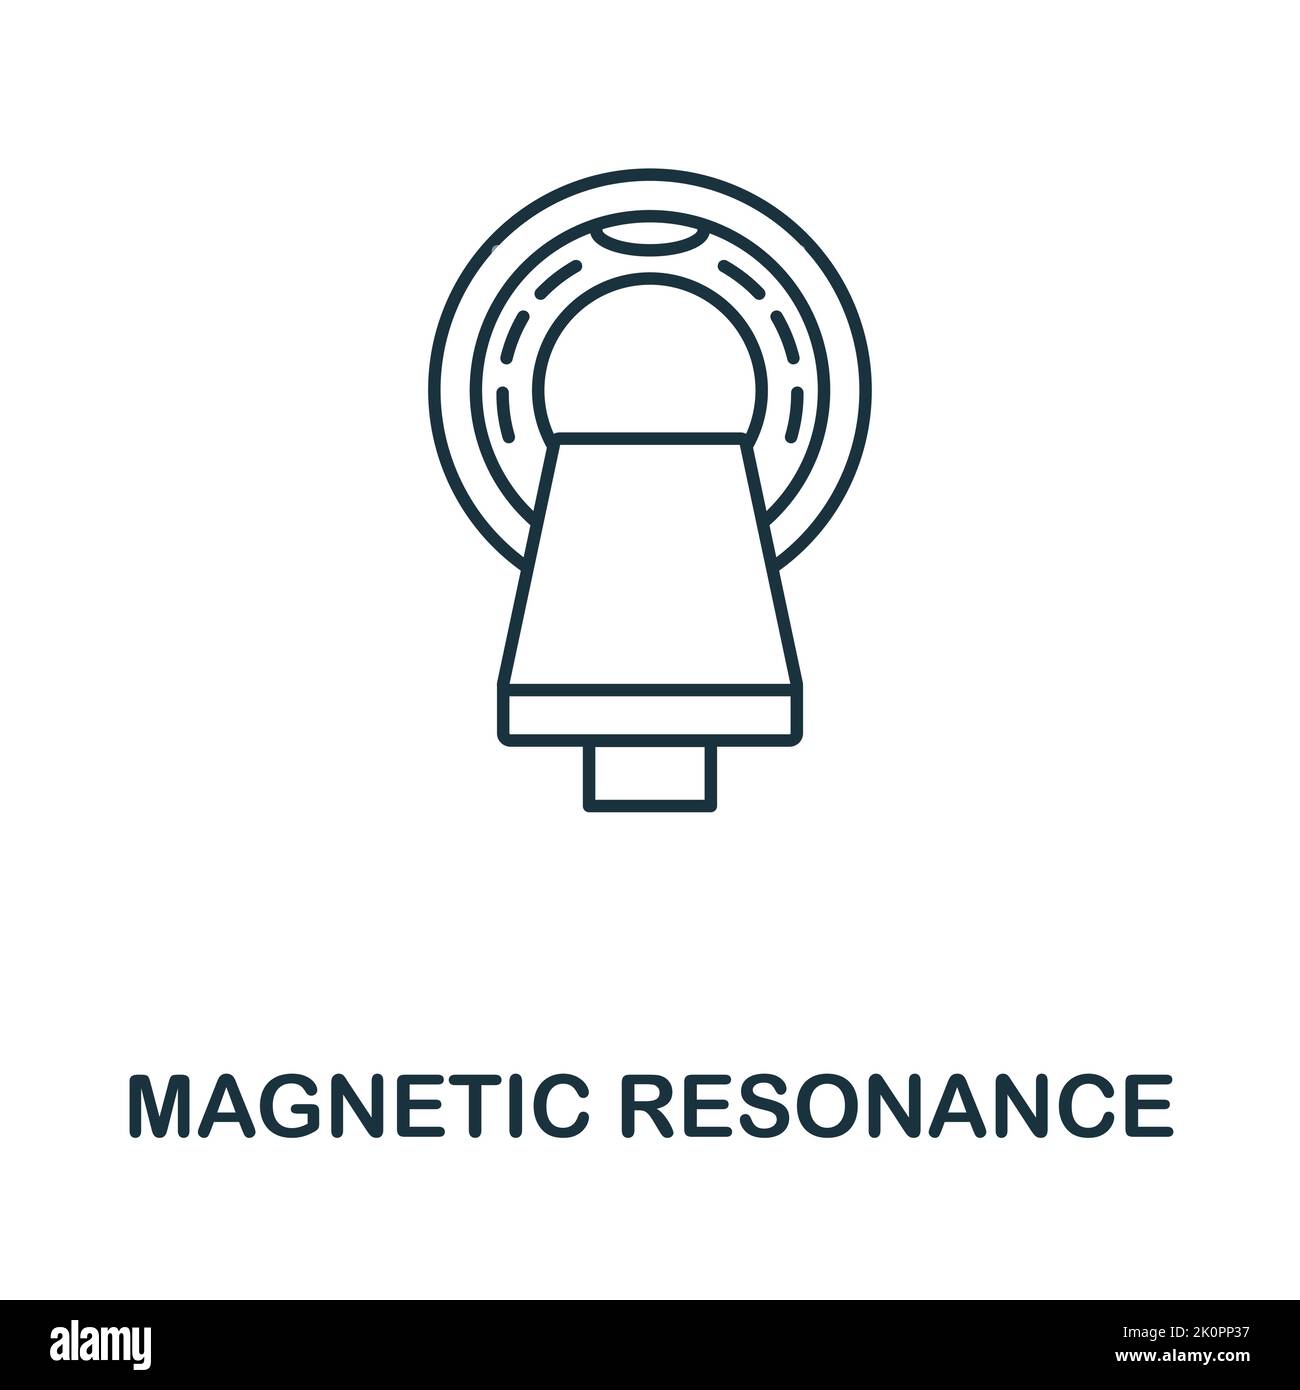 Magnetic Resonance icon. Monocrome element from medical services collection. Magnetic Resonance icon for banners, infographics and templates. Stock Vector